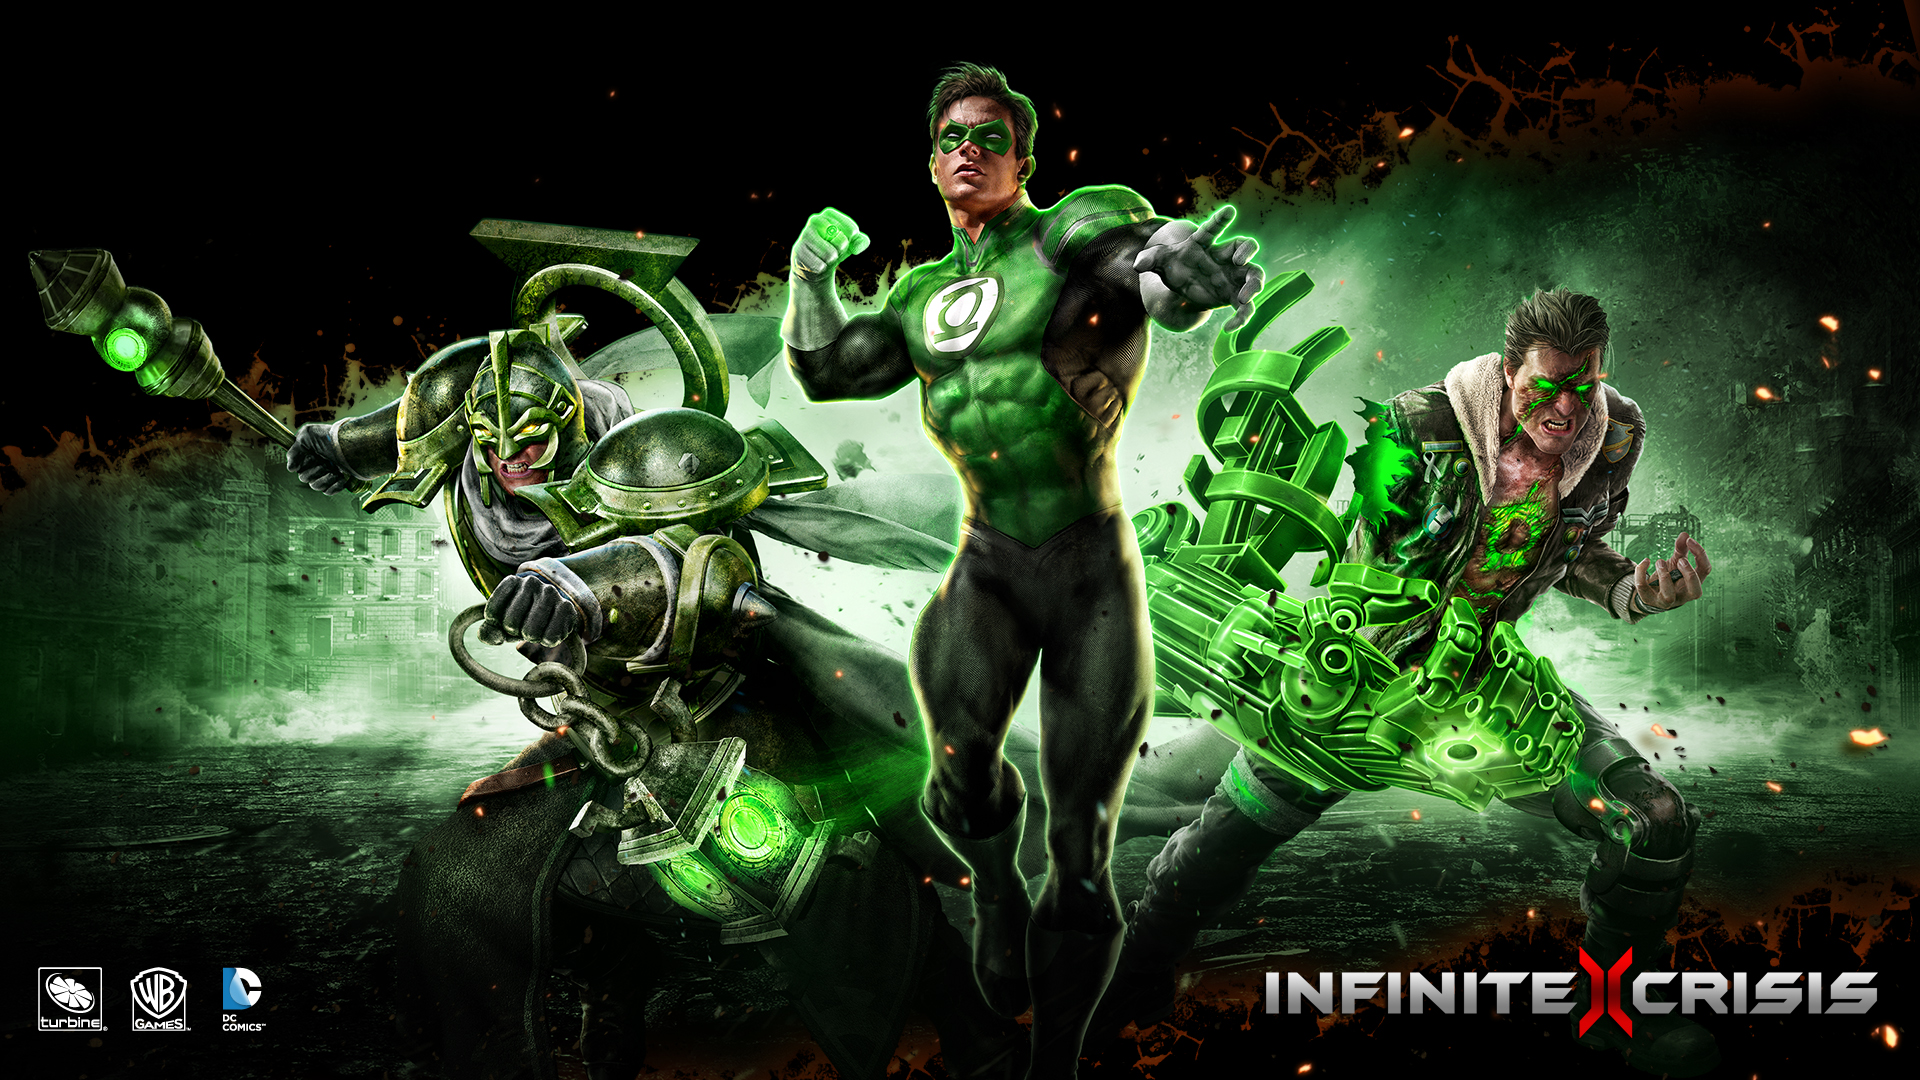 Infinite Crisis dreams of going big, Partners with Major ...